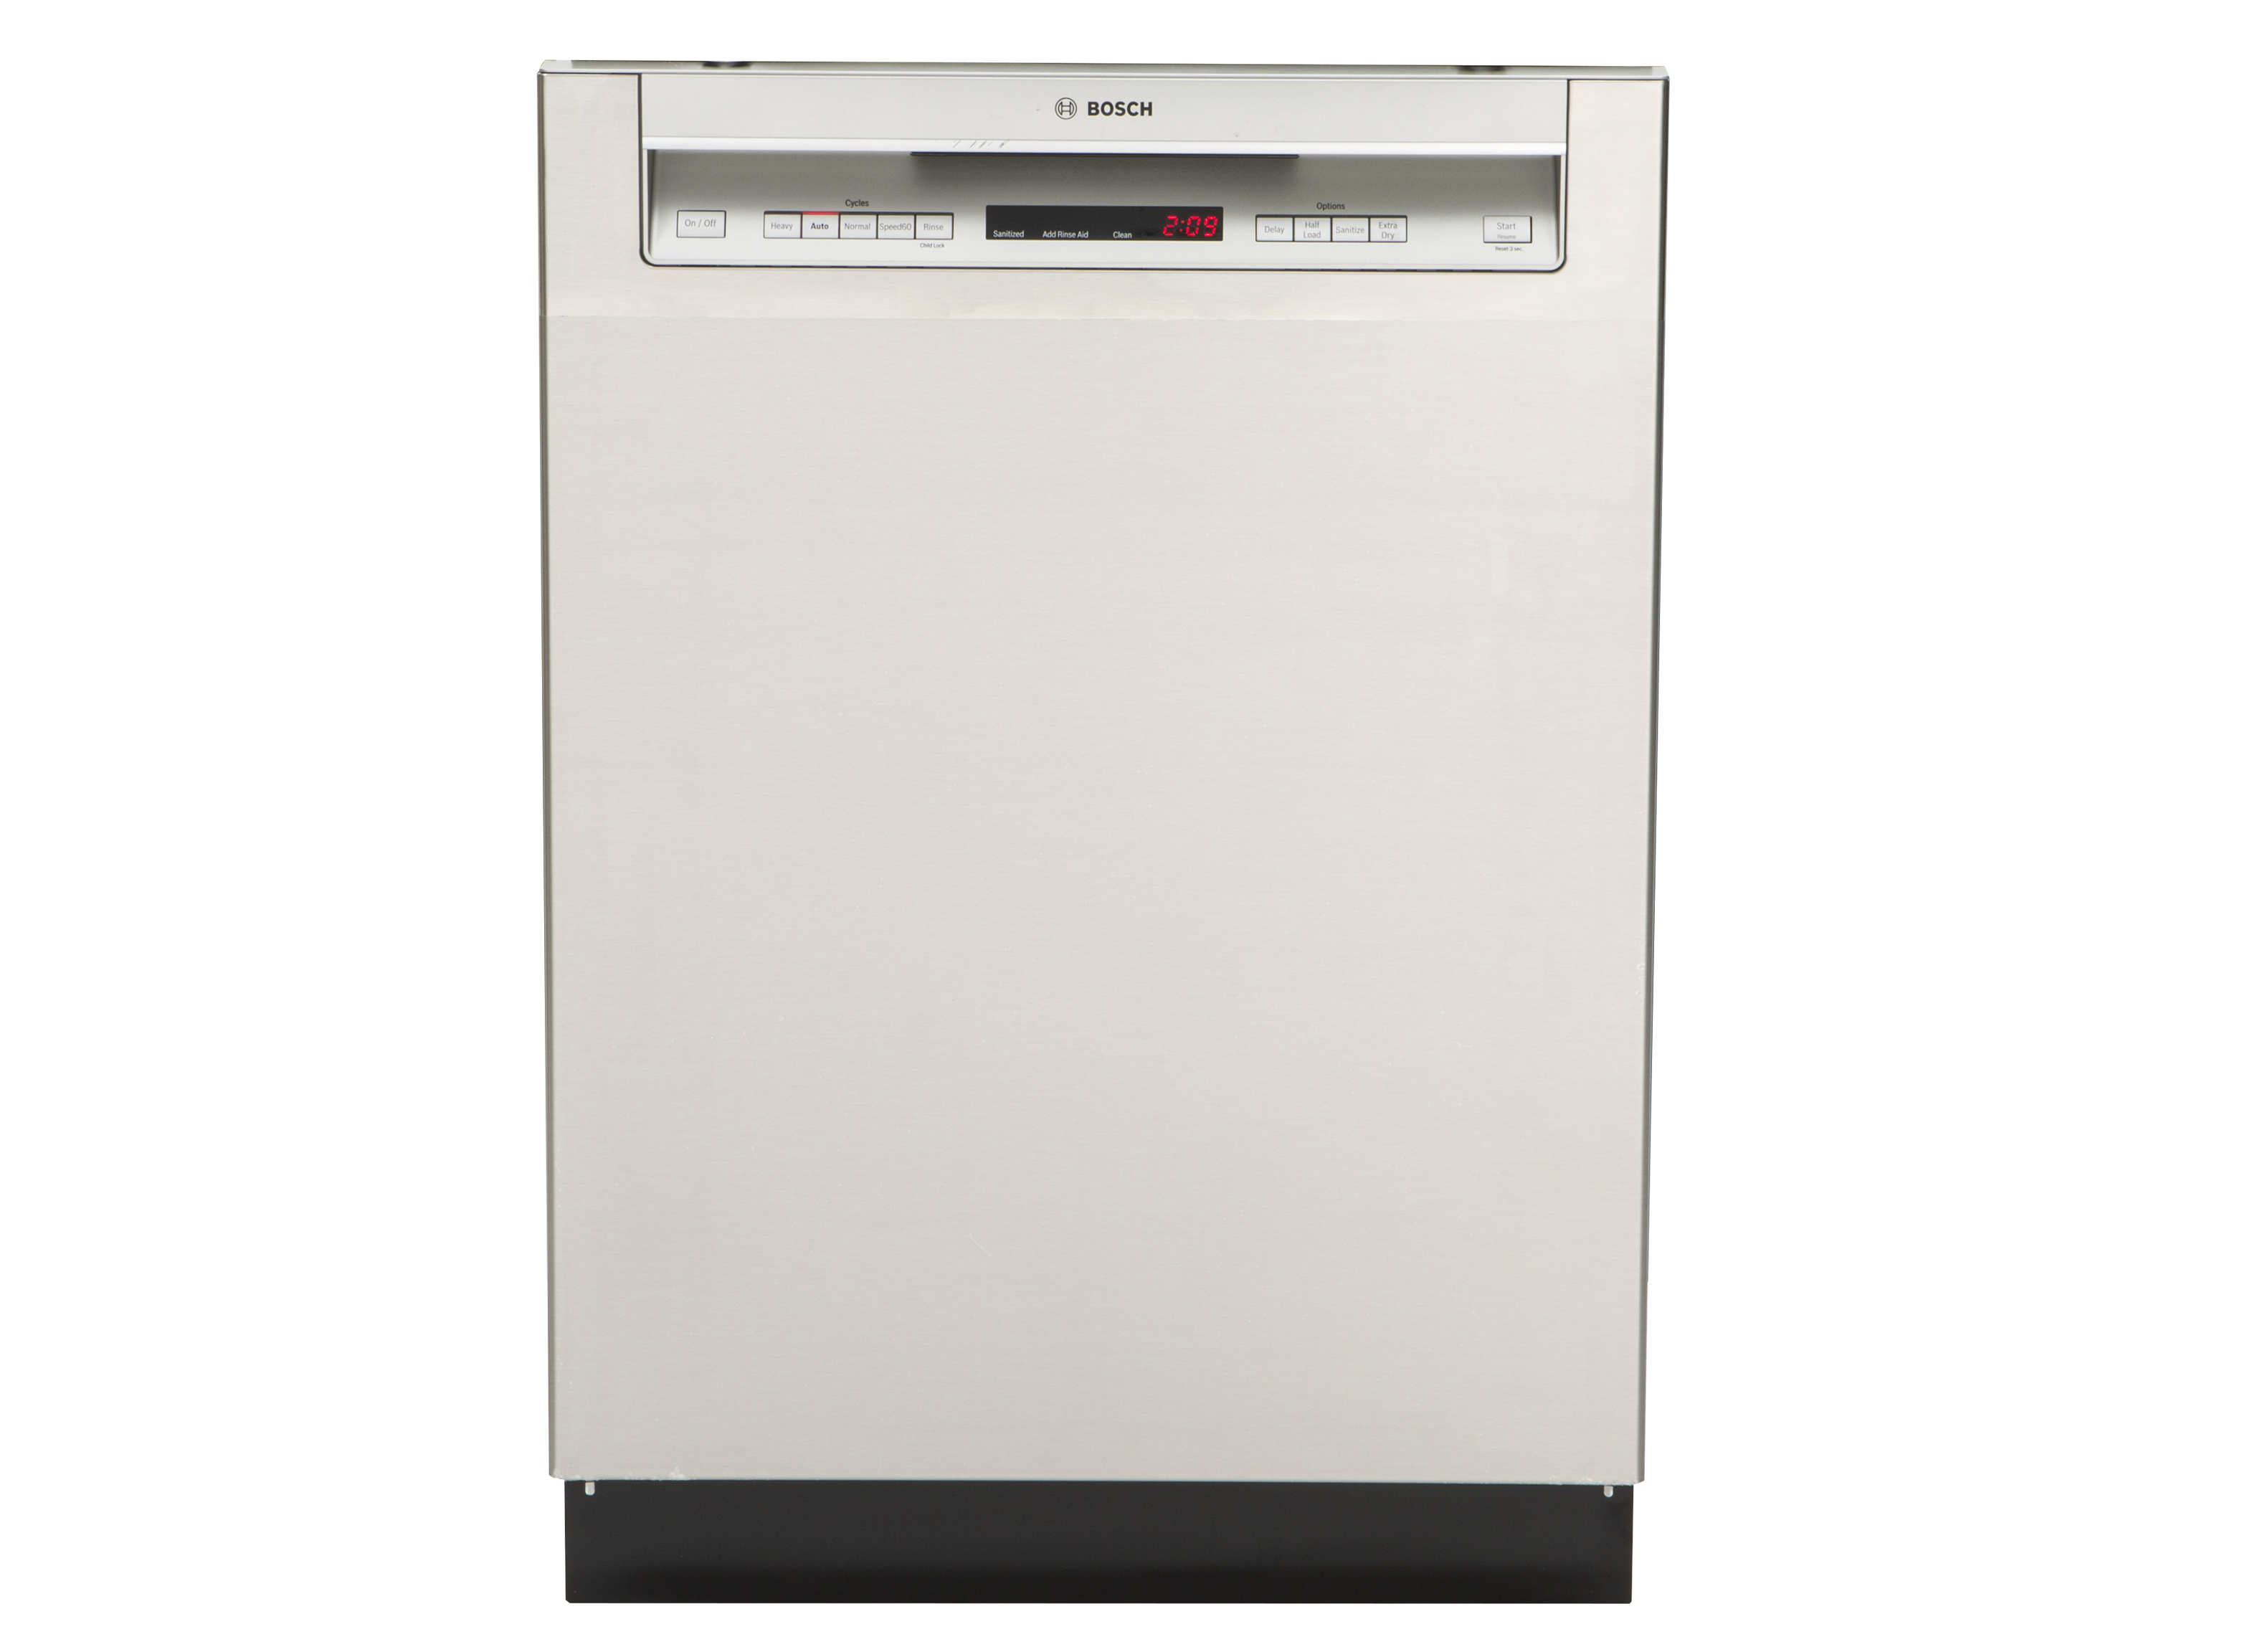 Bosch SHSM63W55N 300 Series 24 Inch Stainless Steel Built-In Fully  Integrated Dishwasher